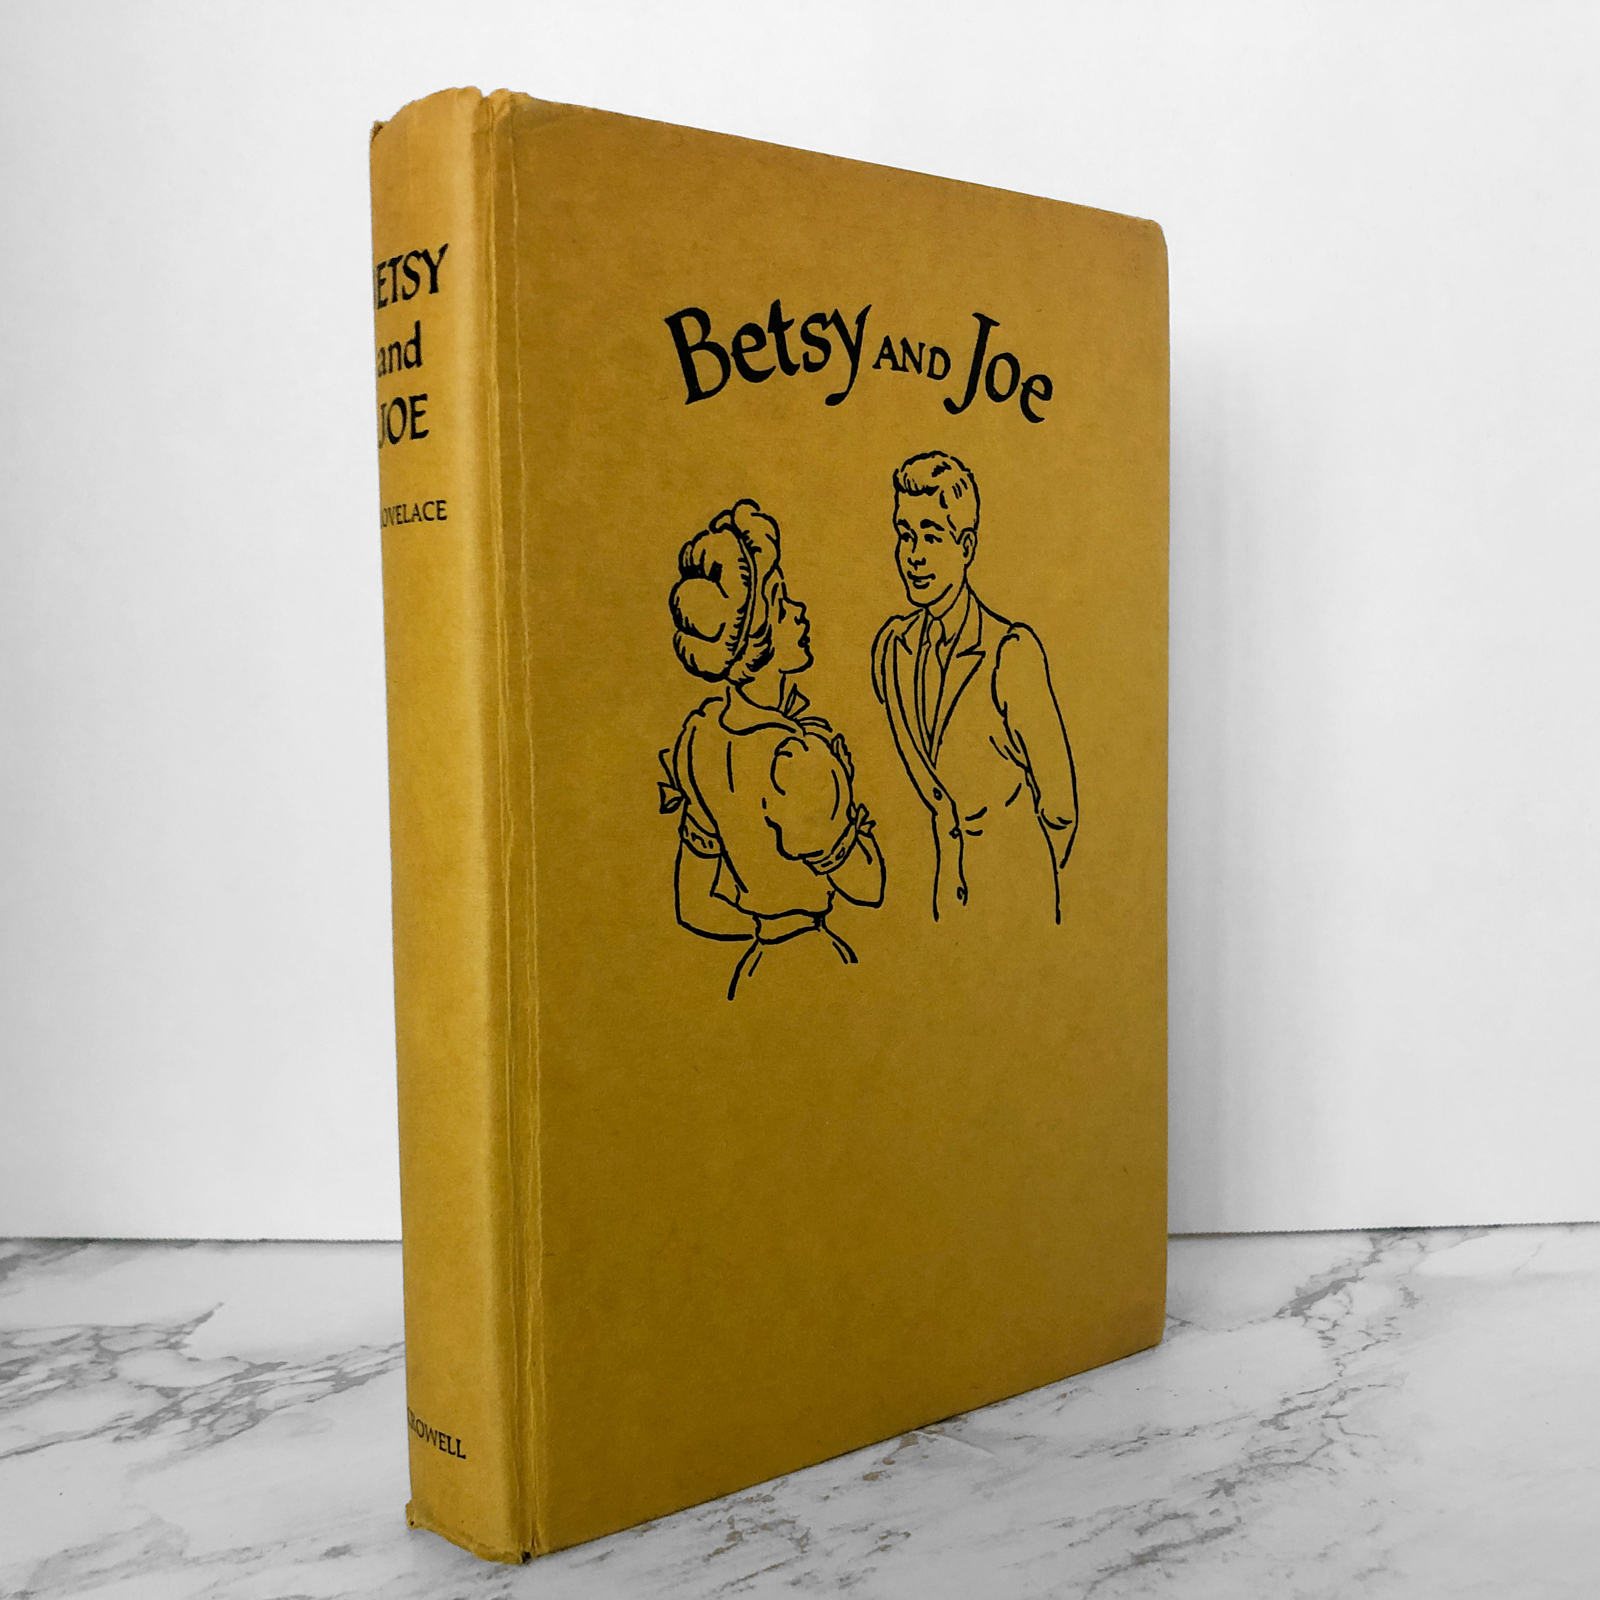 Betsy and Joe by Maud Hart Lovelace [FIRST EDITION] BetsyTacy